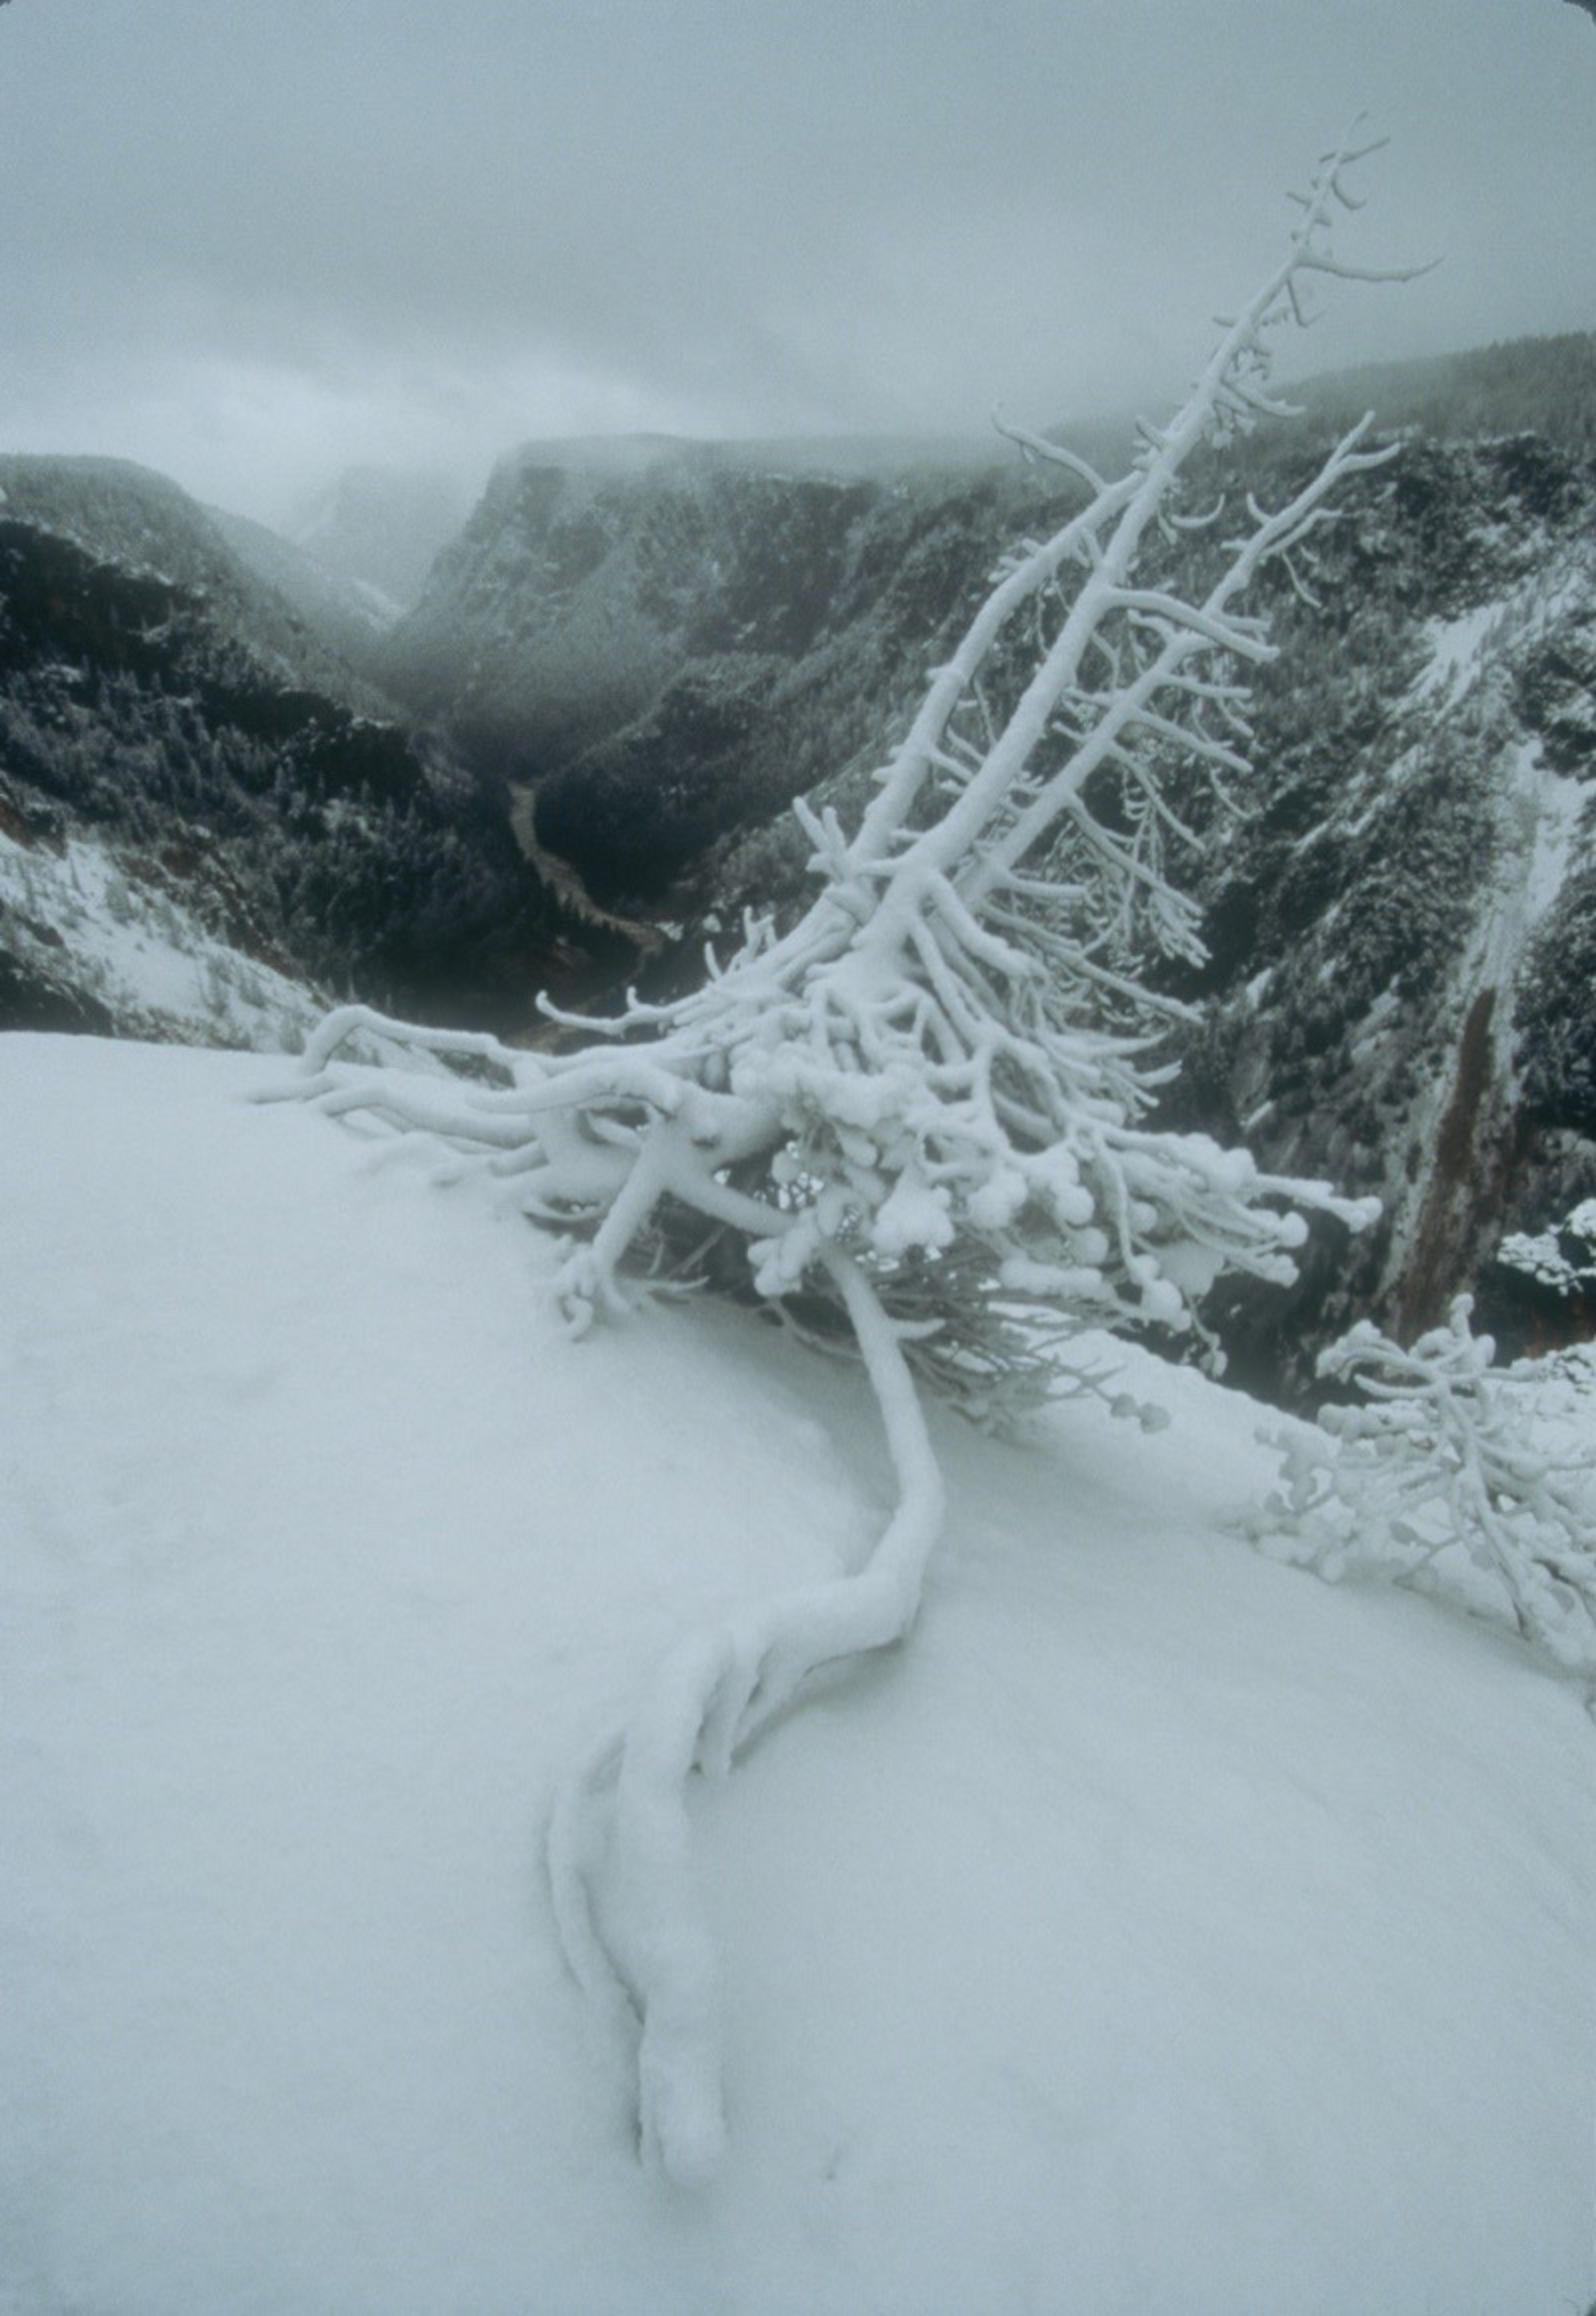 "A winter snowstorm embellishes this old pine snag that has extended a formidable root in an attempt to belay the itself from being drawn into the maw of the canyon," Fuller notes. "Think of clawing your fingernails in slow motion into the top edge of a cliff with a 1,200-foot exposure. Eventually the pull of gravity over-whelmes the life force in all of us." Photo by Steven Fuller